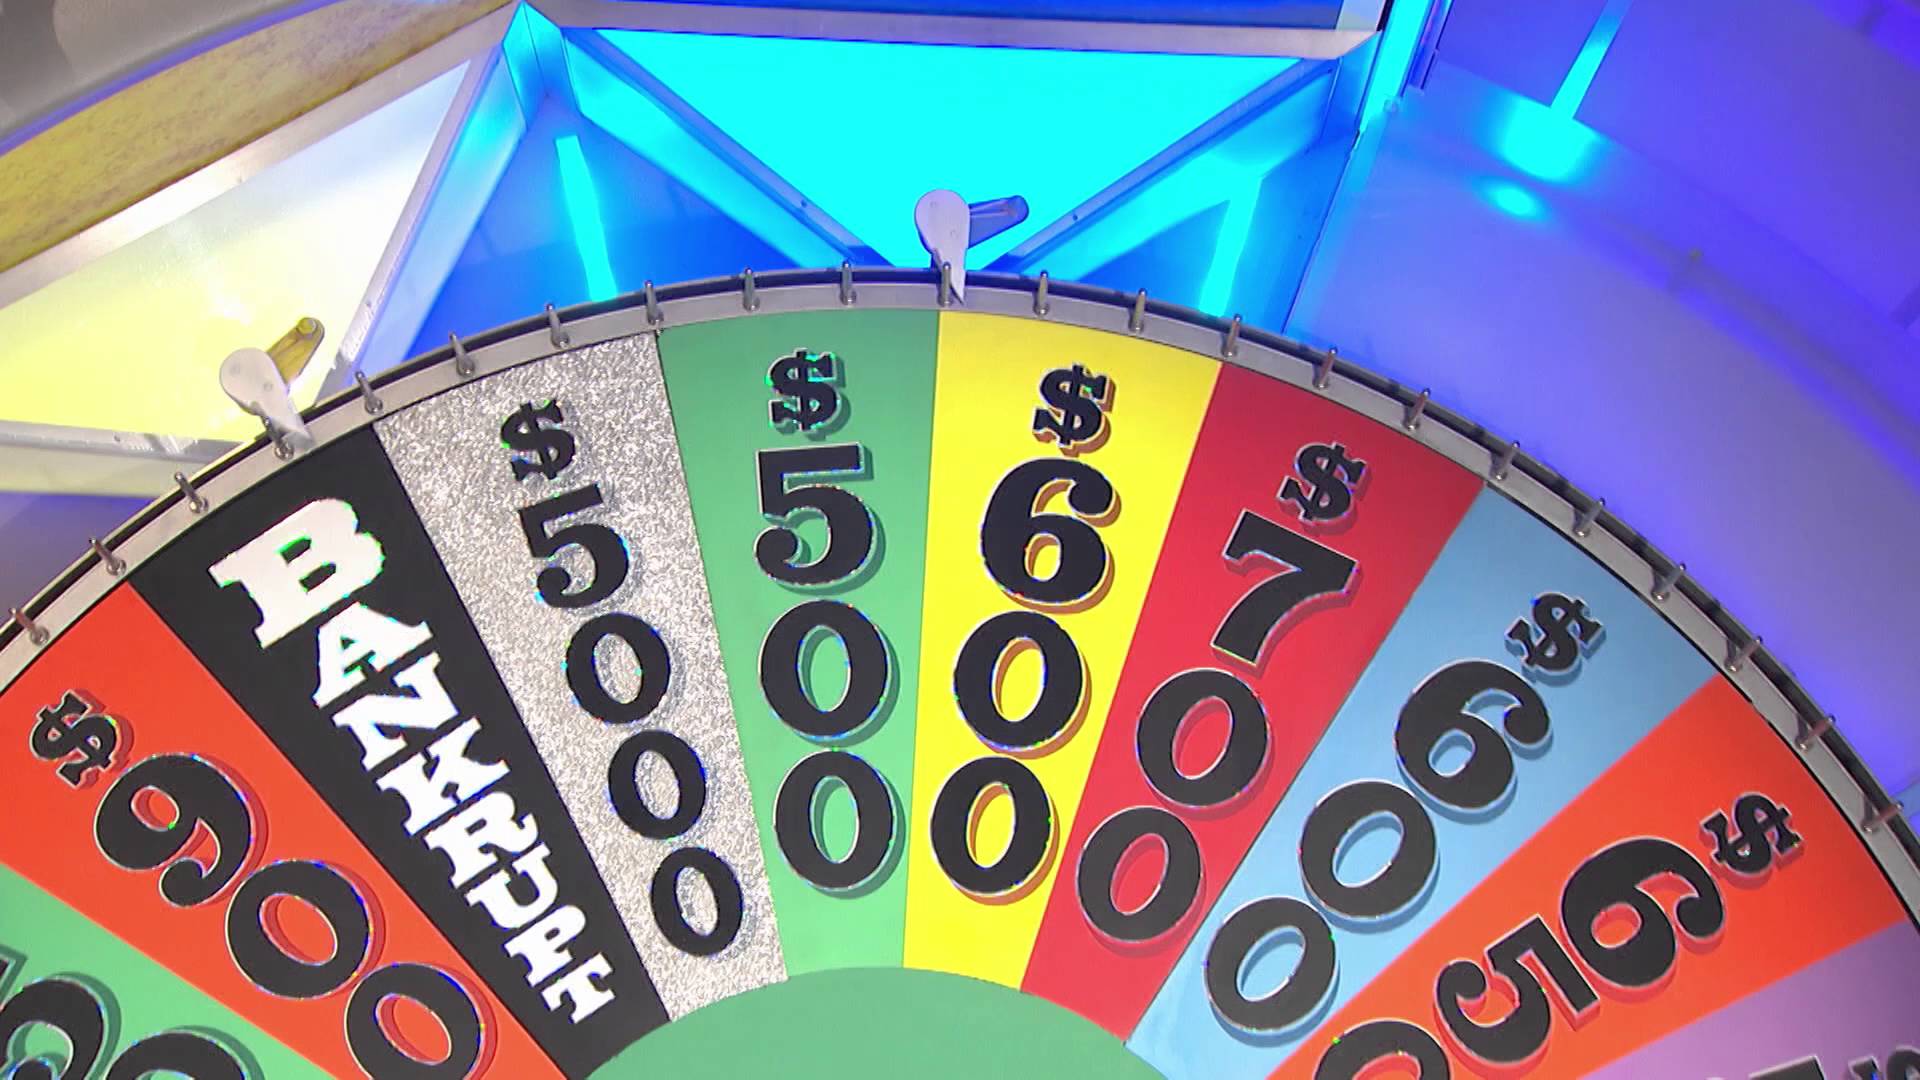 2 player wheel of fortune online game